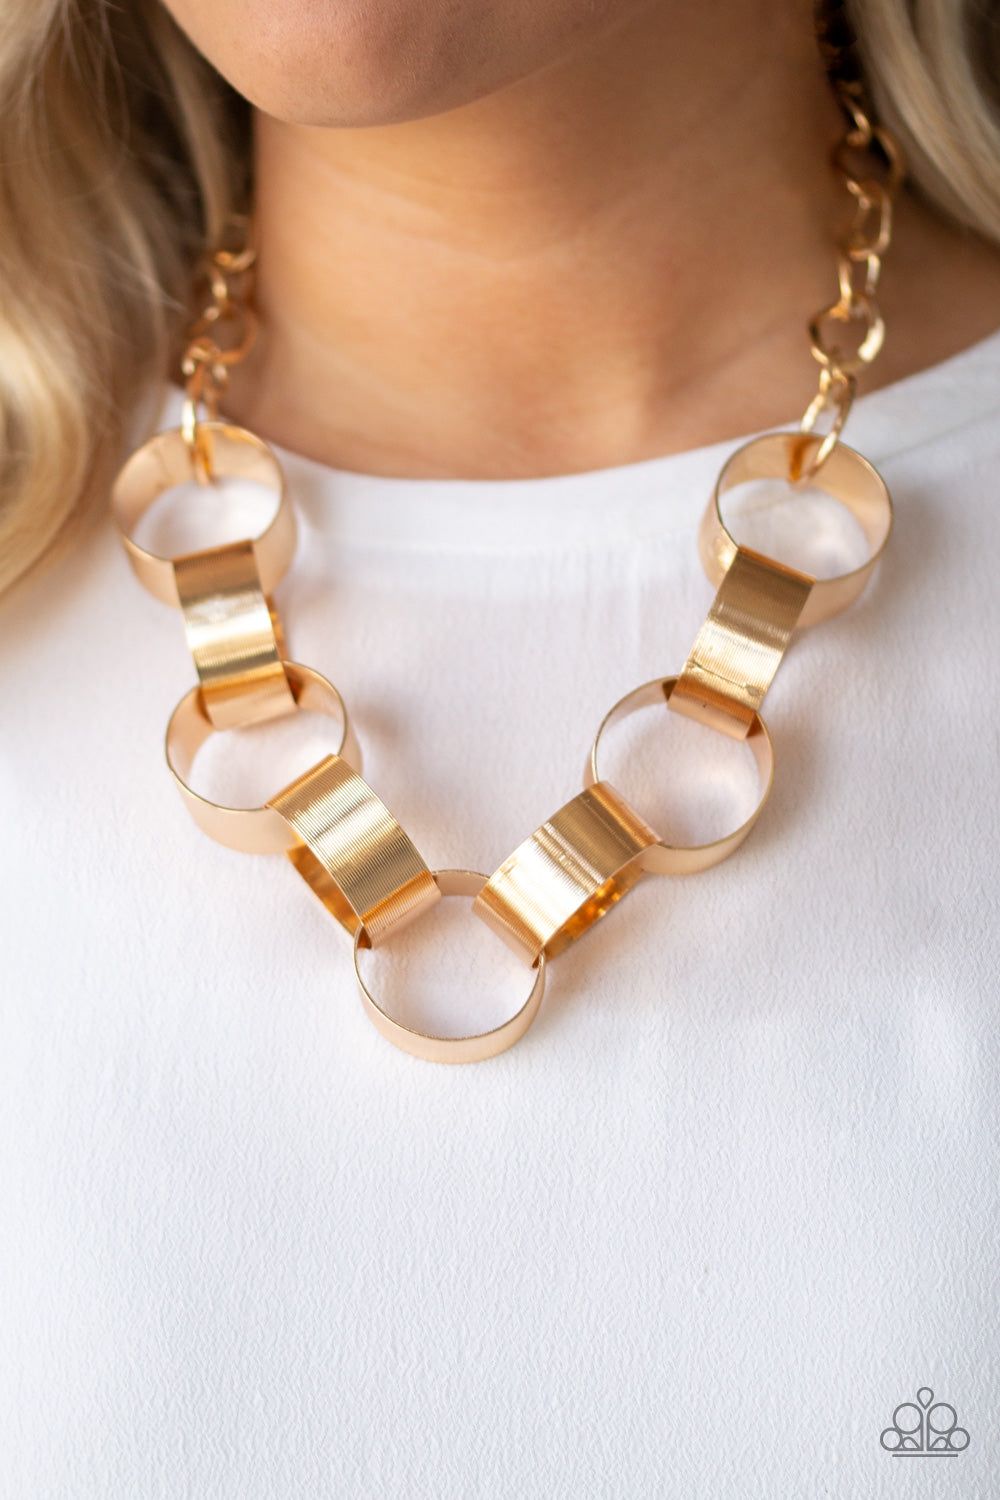 Etched in linear patterns, dramatically oversized gold links connect below the collar for a bold statement-making look. Features an adjustable clasp closure. Sold as one individual necklace. Includes one pair of matching earrings.